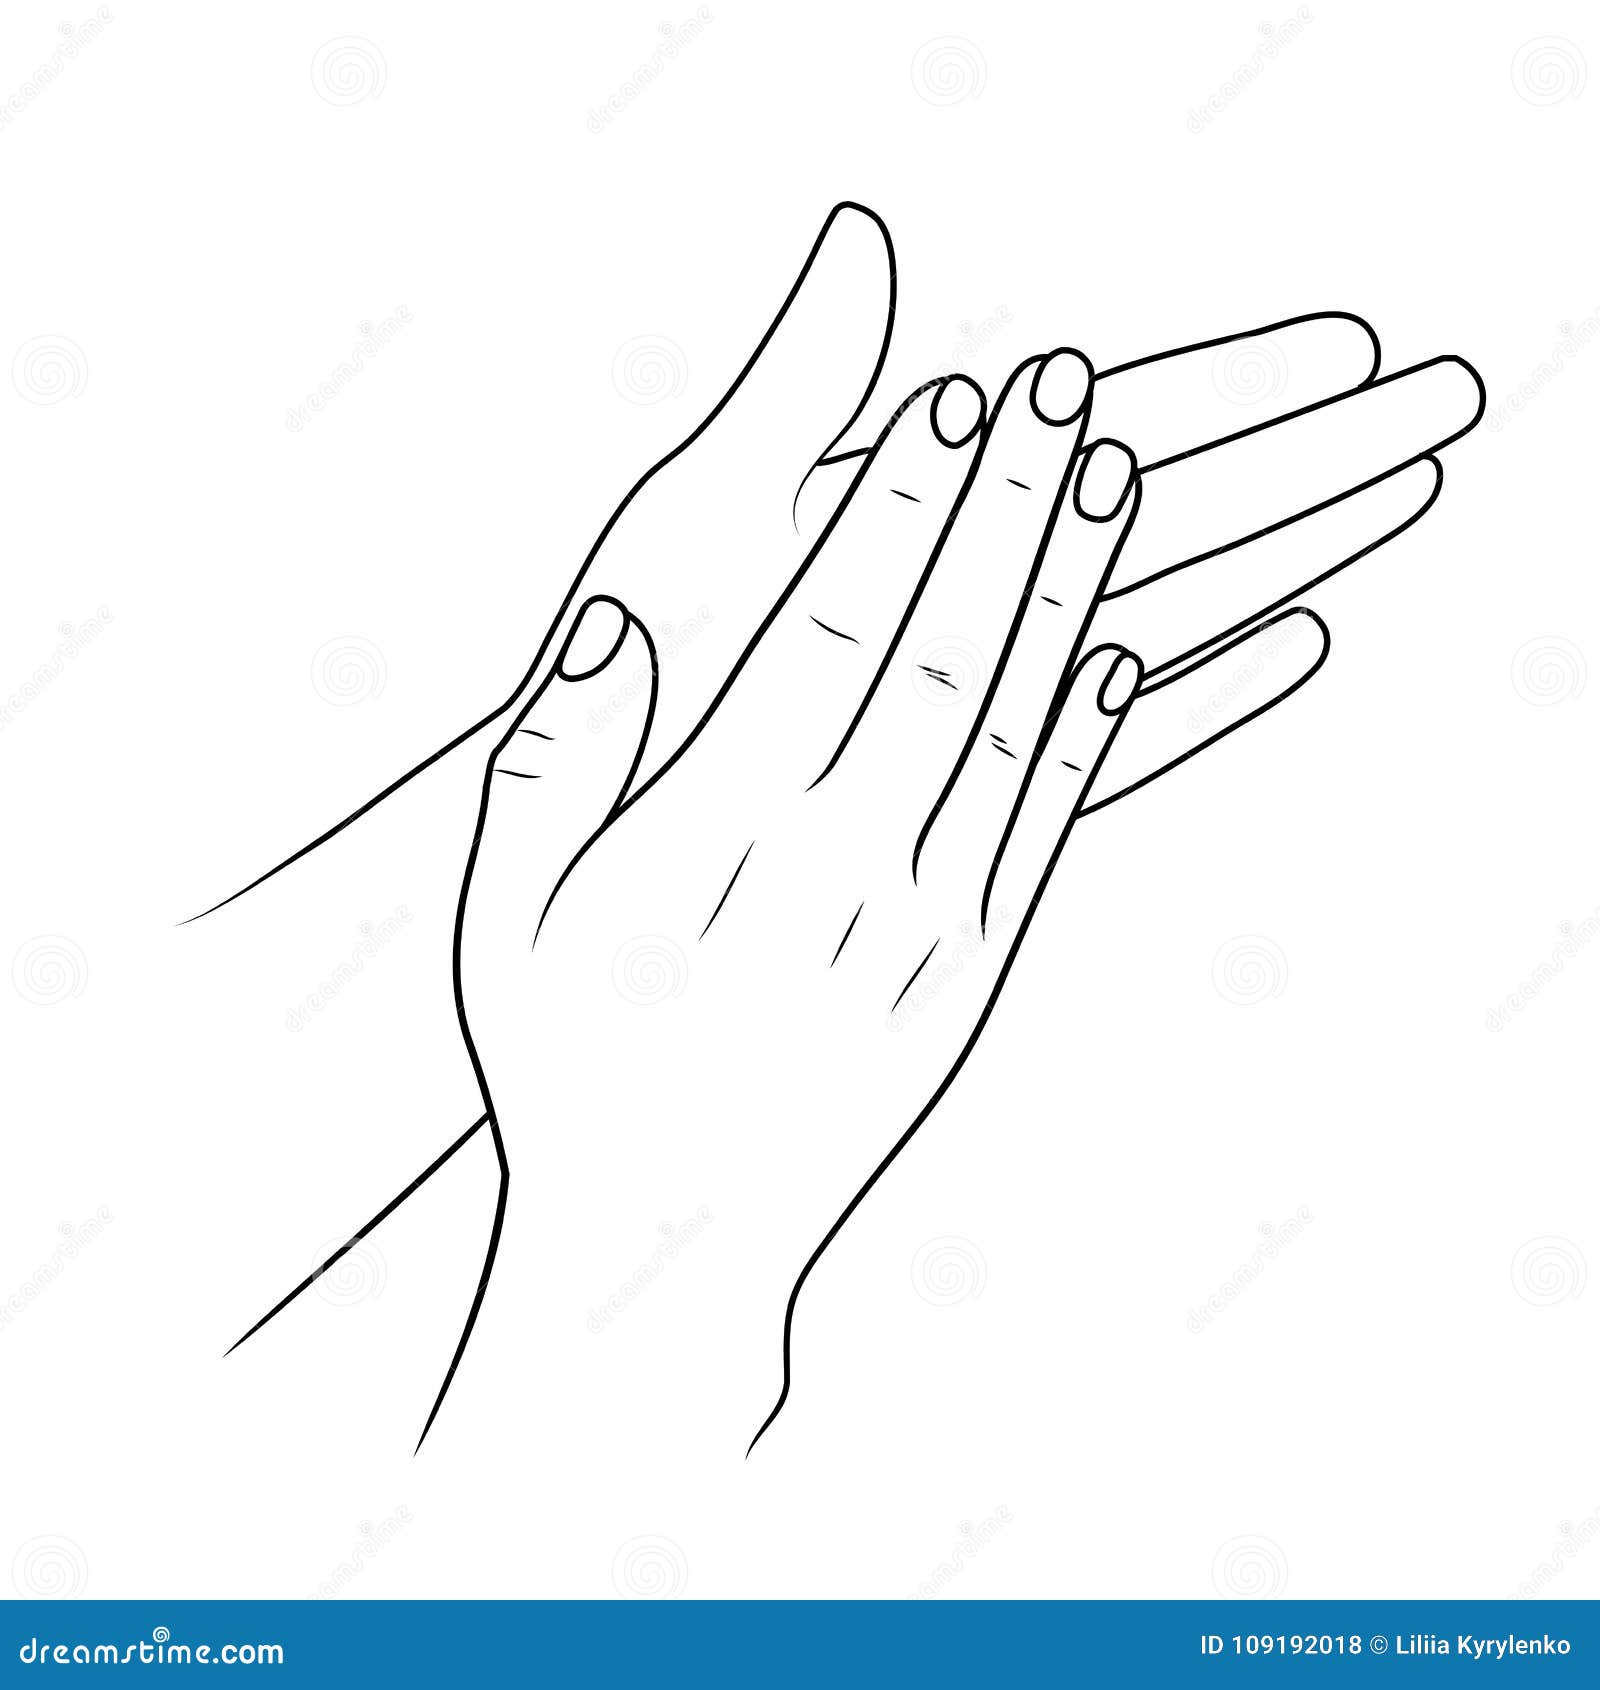 Doodle applause. Happy people drawn hands, high... - Stock Illustration  [90553145] - PIXTA